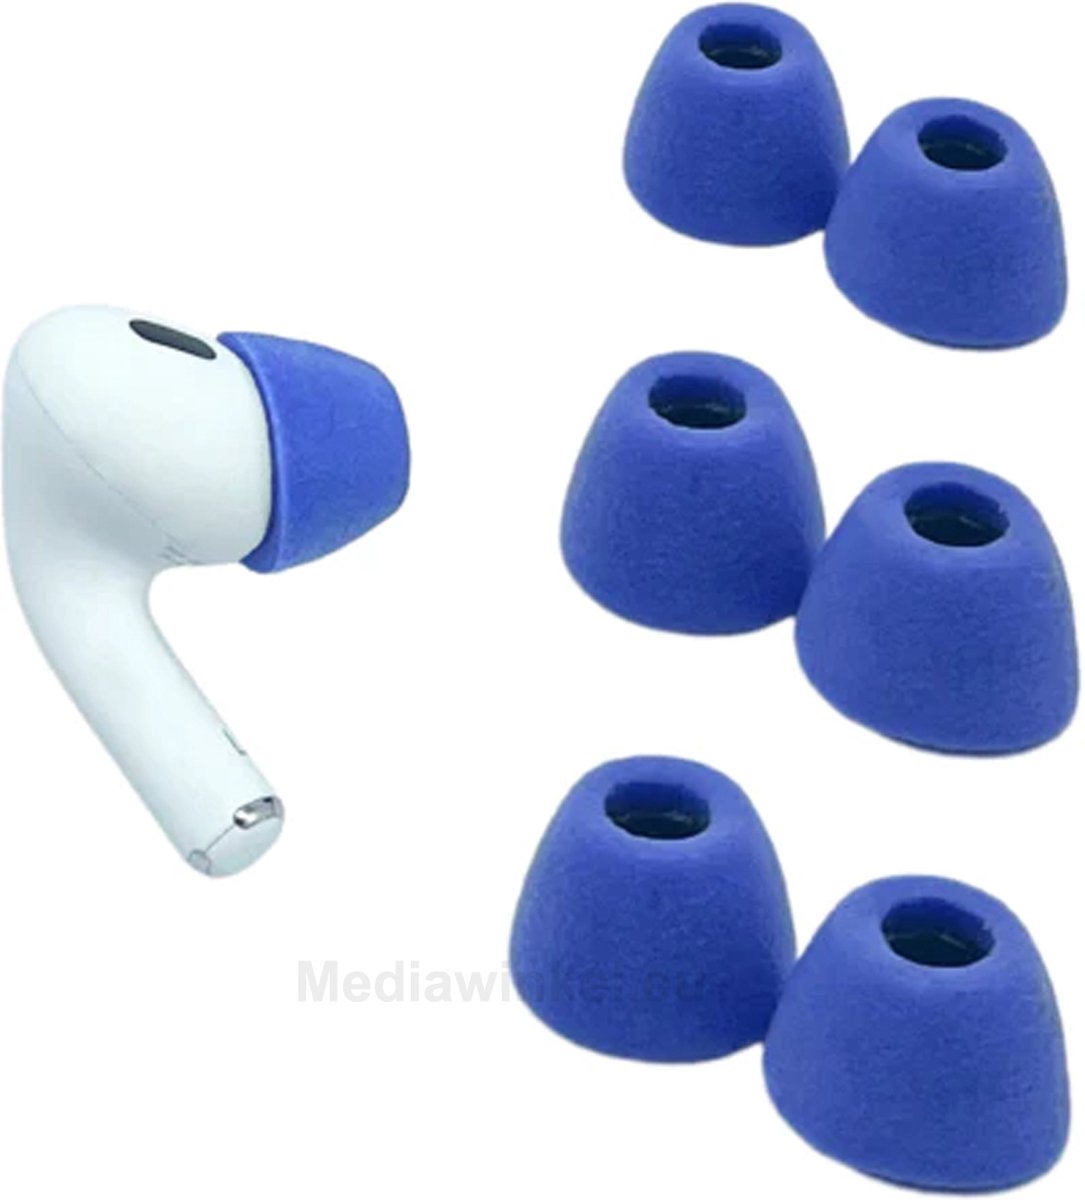 Comply Foam Tips 2.0 voor AirPods Pro, size: small, Electrice Blue